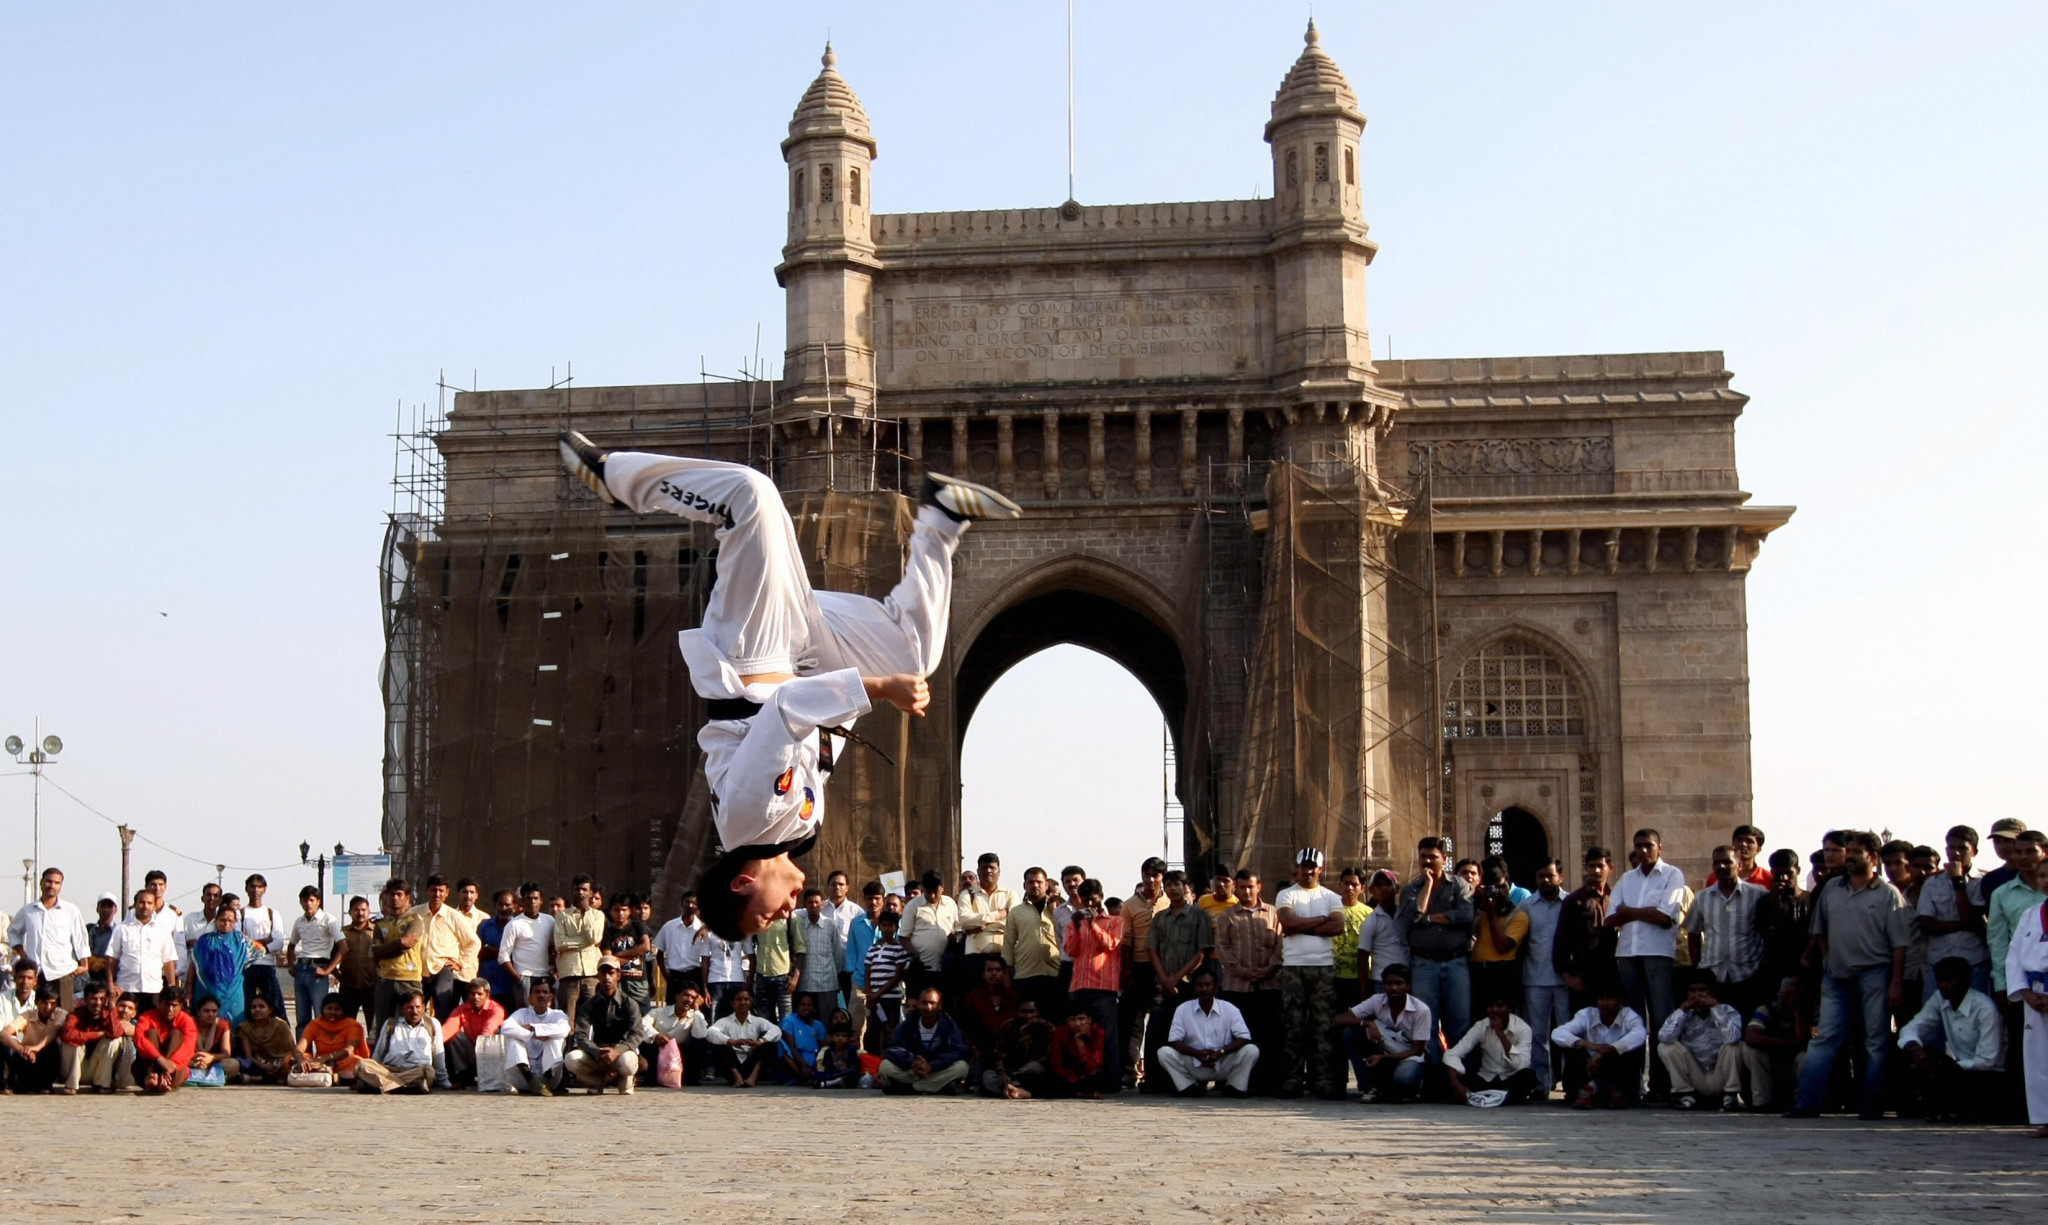 A taekwondo athlete performs by the Gateway of India in Mumbai ©Getty Images